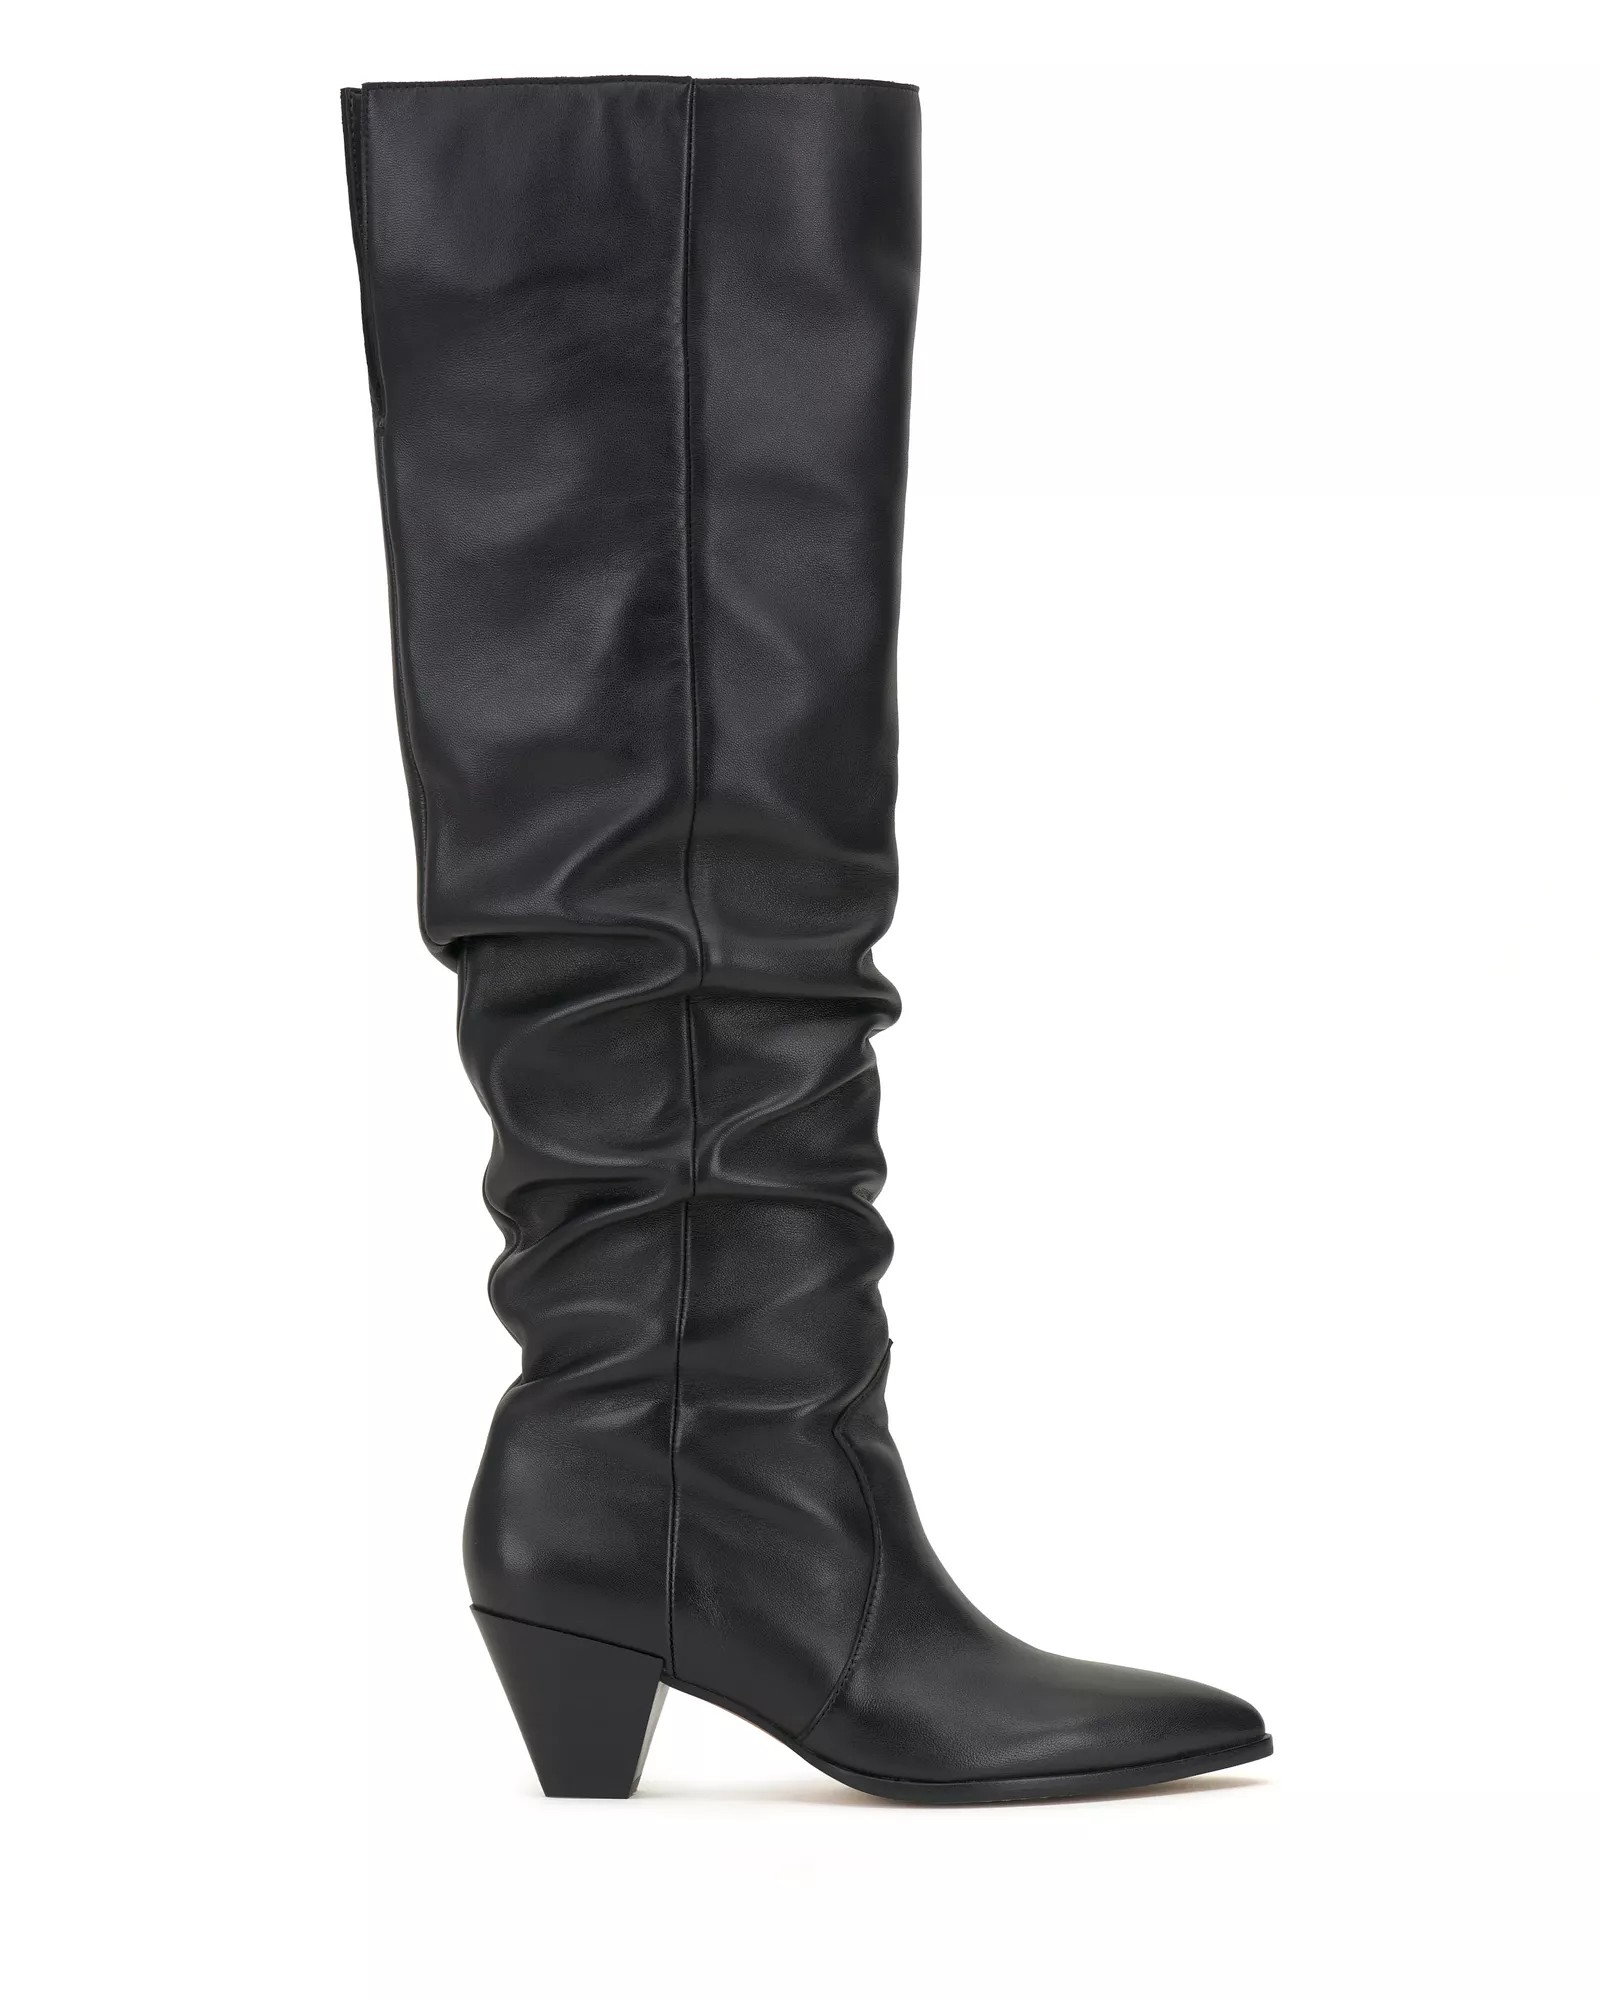 Vince Camuto Sewinny Wide Calf Over The Knee Boot 